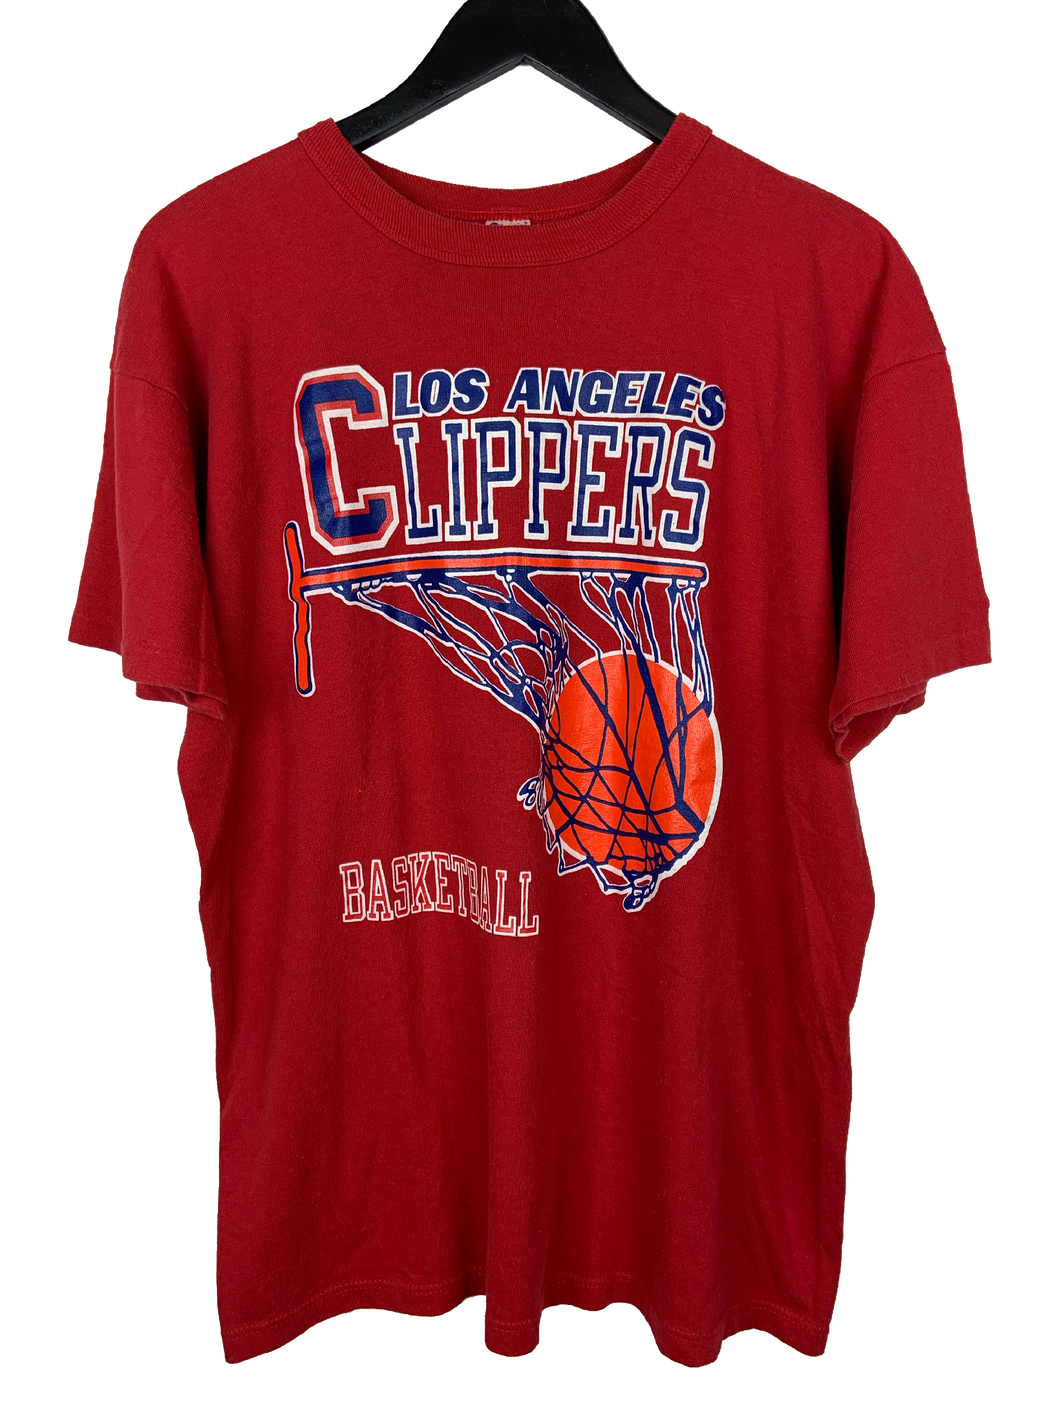 VINTAGE LOS ANGELES CLIPPERS 'SS' TEE - XL